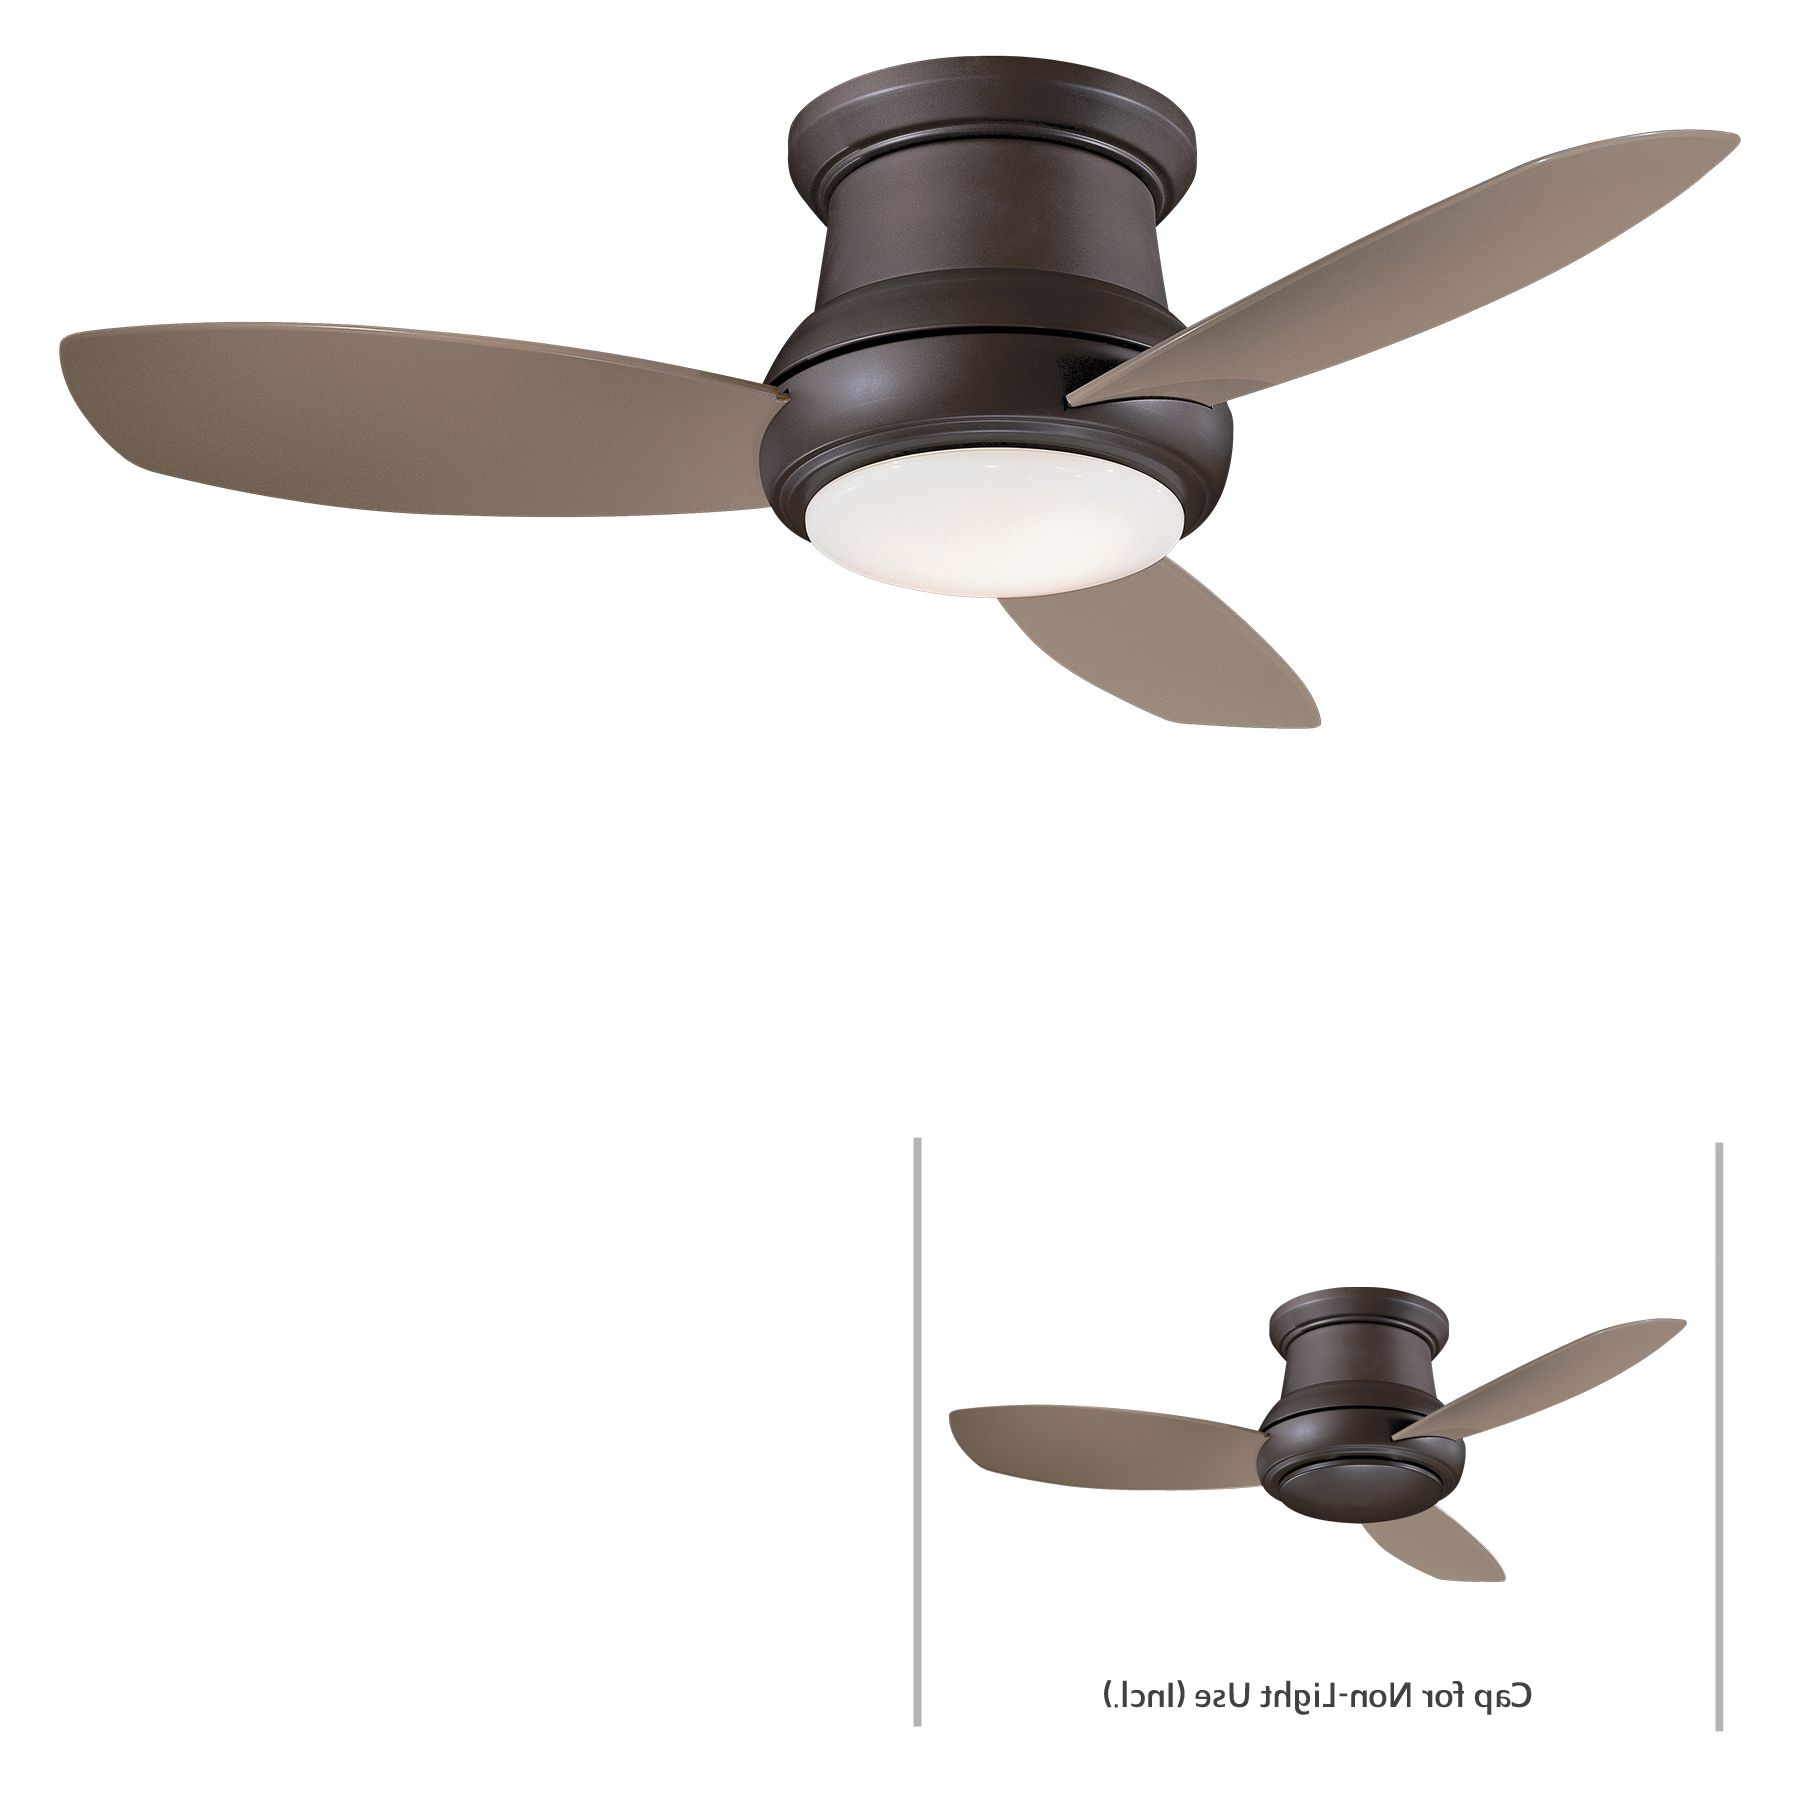 Minka Group® :: Brands :: Minka Aire® :: F518l Orb Throughout Trendy Concept Ii 3 Blade Ceiling Fans (View 13 of 20)